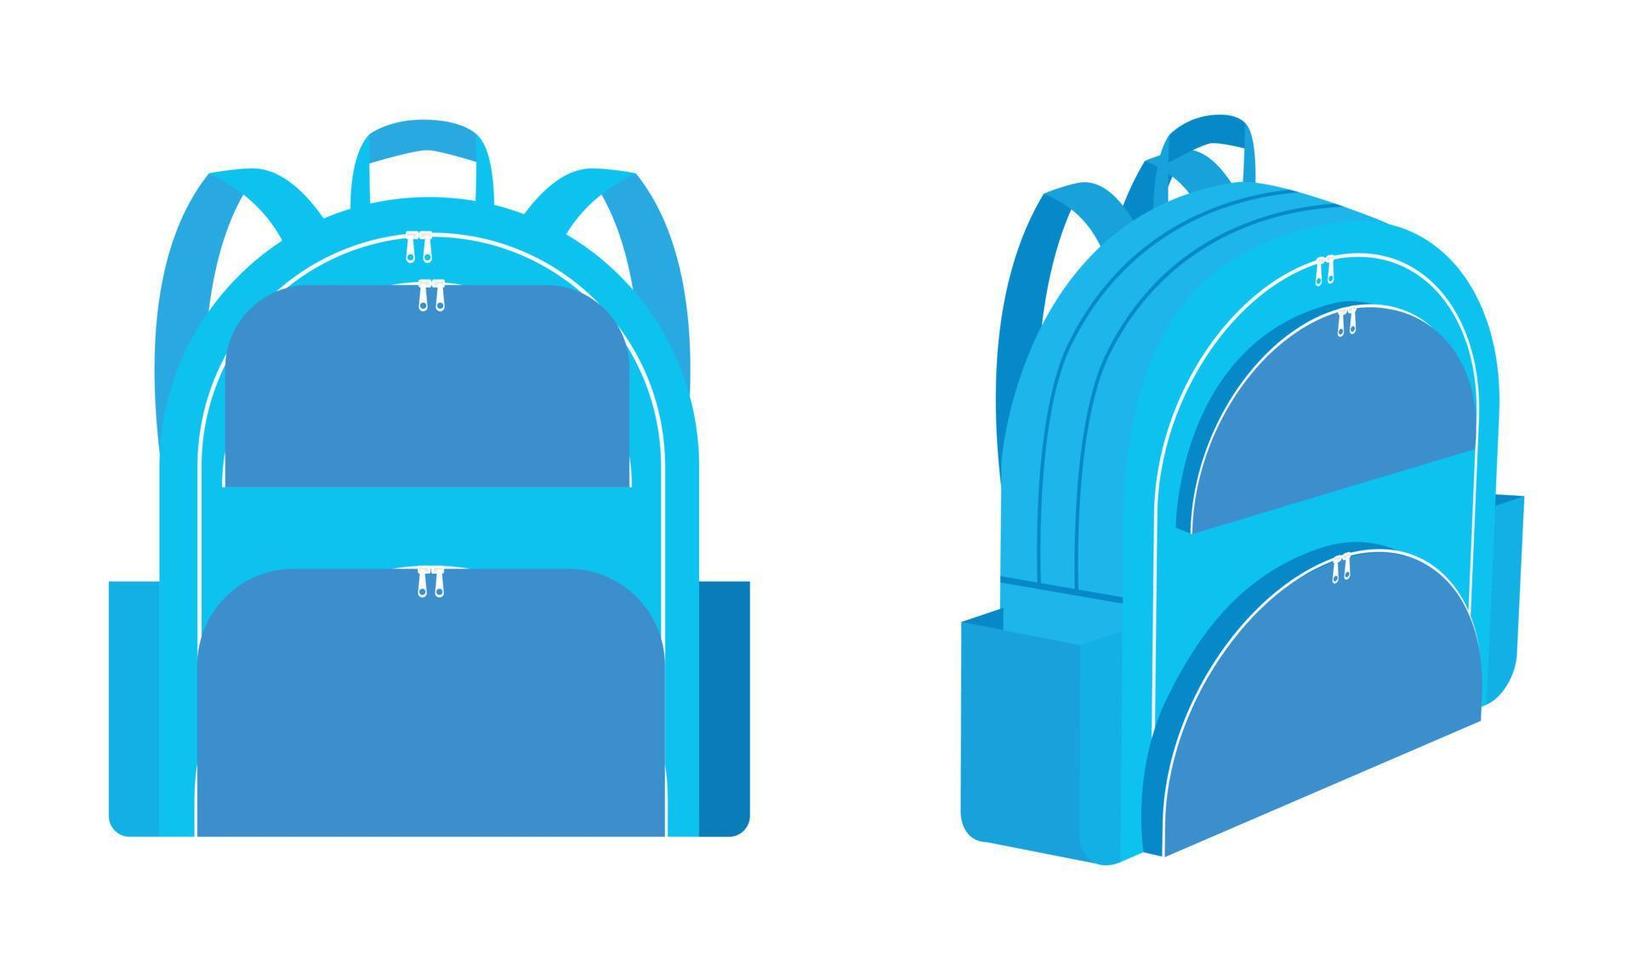 Cyan foldable backpack with front zippered pocket, outdoor folding storage package, travel bag, sports gym bag, sketch template isolated on white background vector